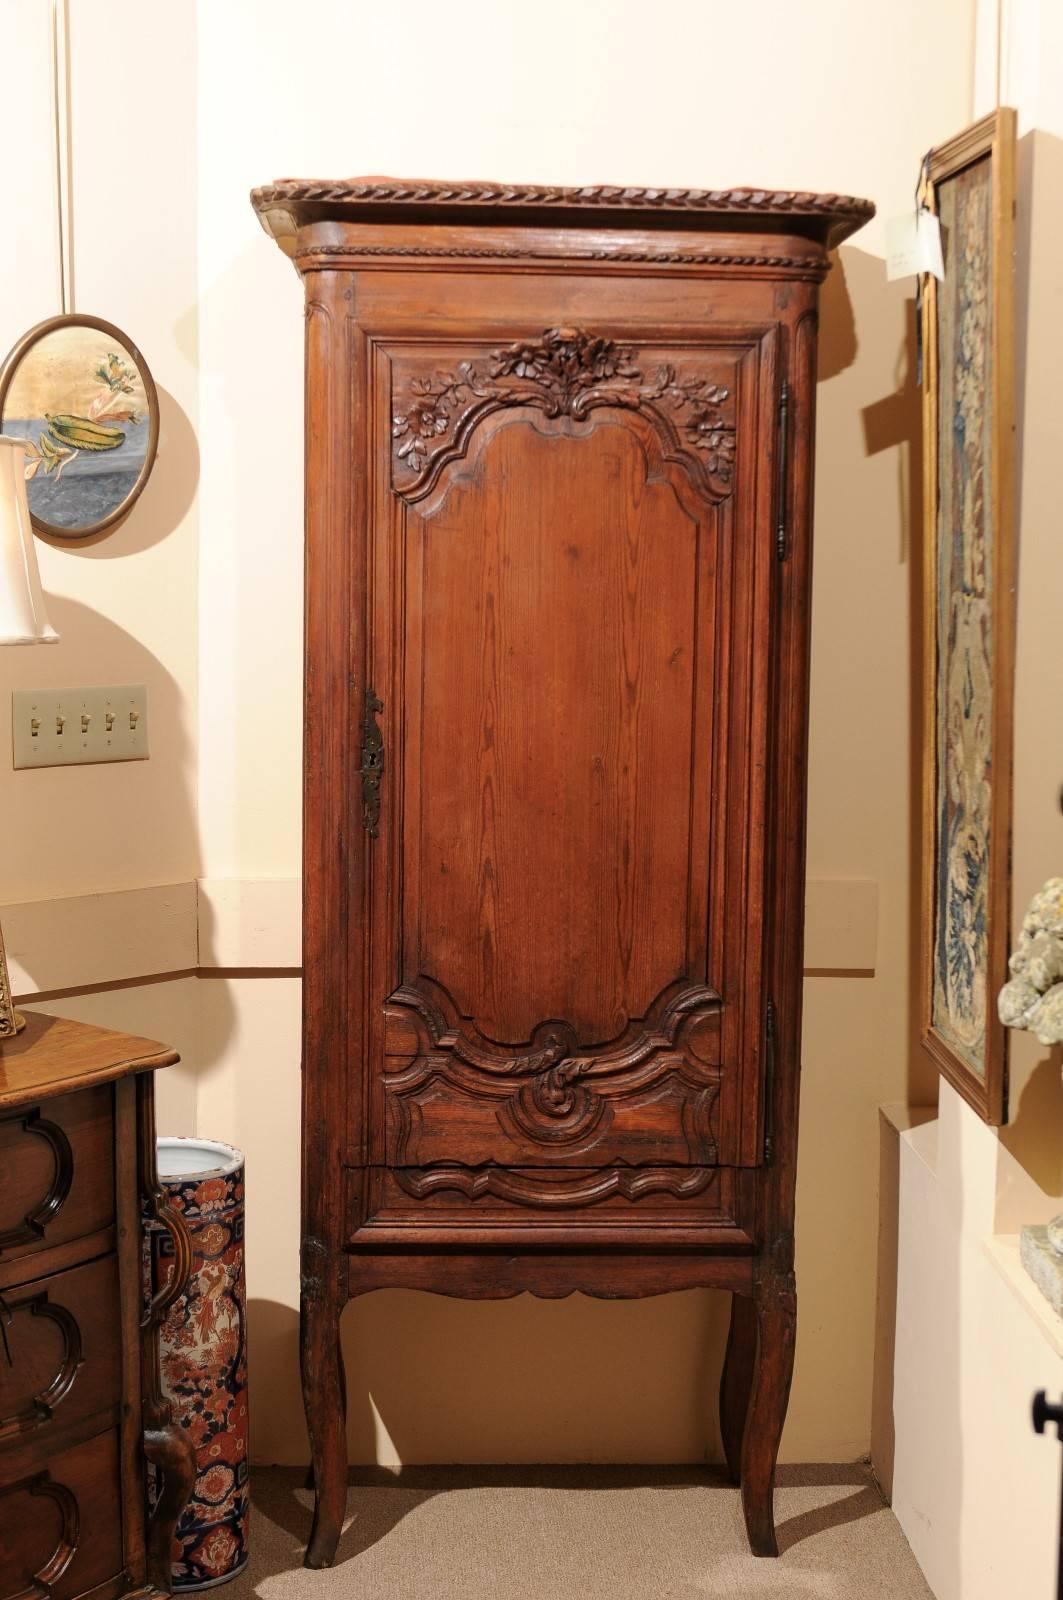 The petite French pine bonnetiere with removable cornice above cabinet with carved flowers on door. The interior with four shelves and drawer below. All resting on cabriole legs.